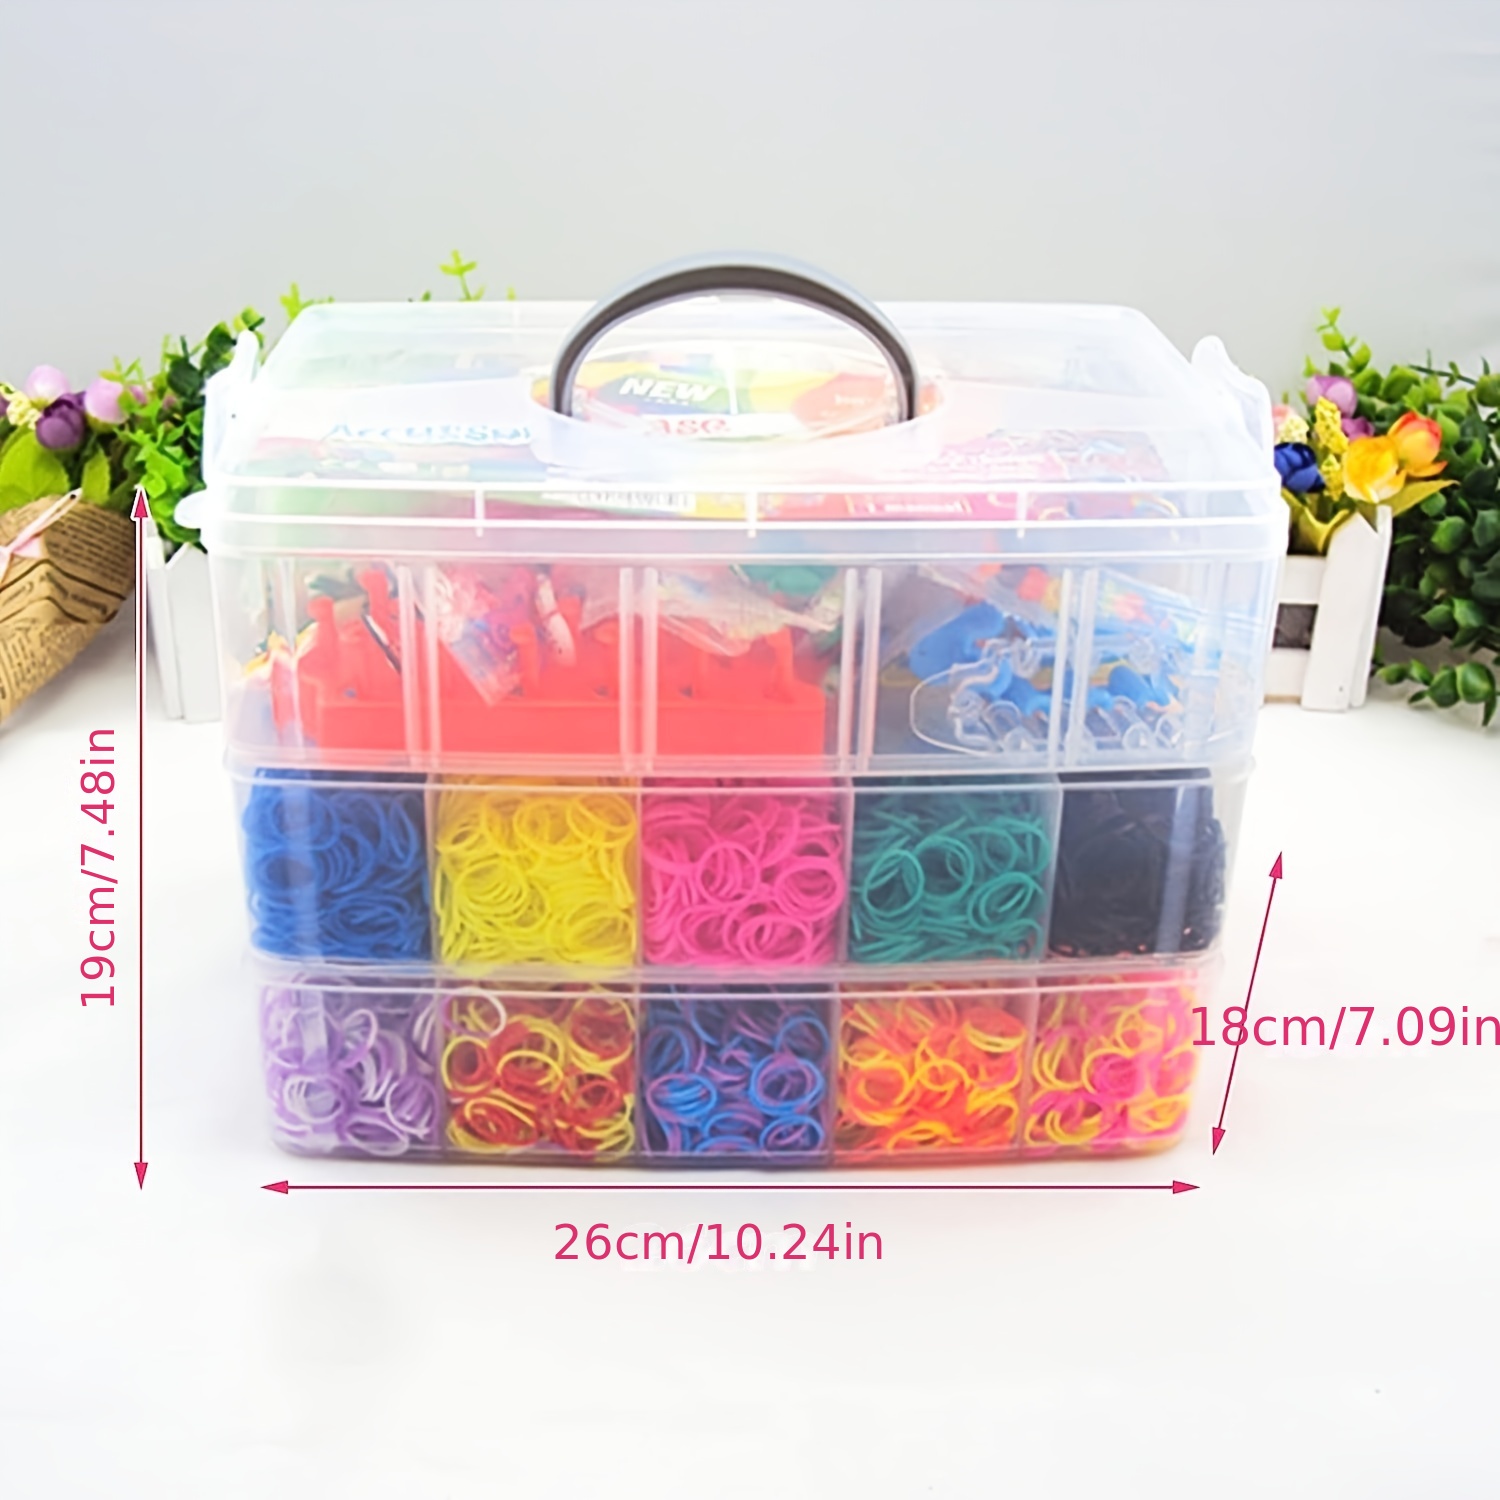 Loom Band Kit, 15000+pcs Loom Rubber Bands In 25 Colors With Storage Box,  DIY Friendship Bracelet Making Kit For Christmas Gifts, Girls Birthday